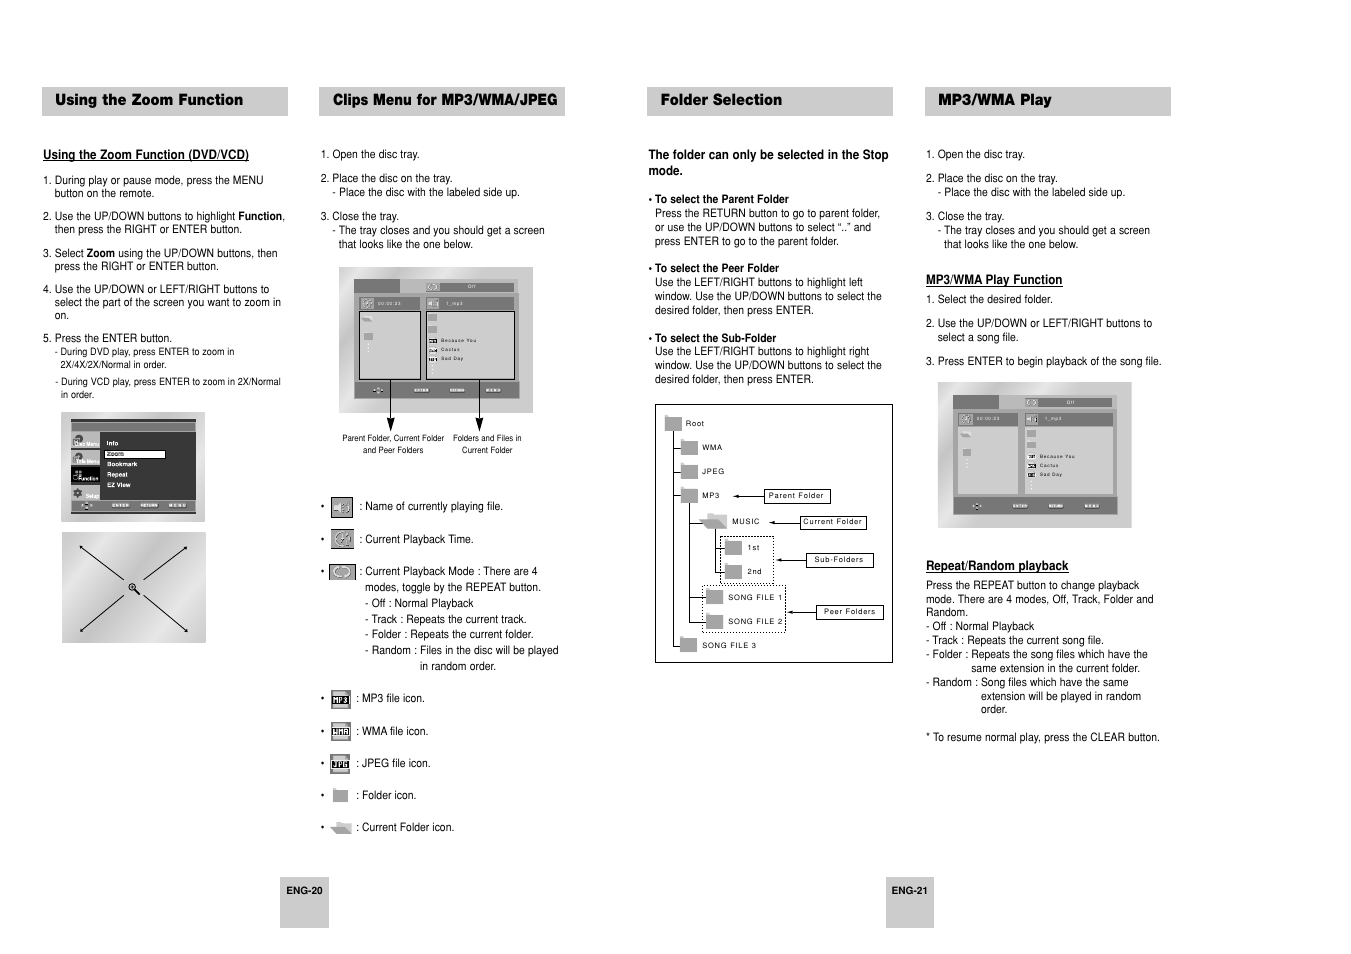 Using the zoom function, Clips menu for mp3/wma/jpeg, Folder selection | Mp3/wma play | Samsung DVD-P248A User Manual | Page 11 / 16